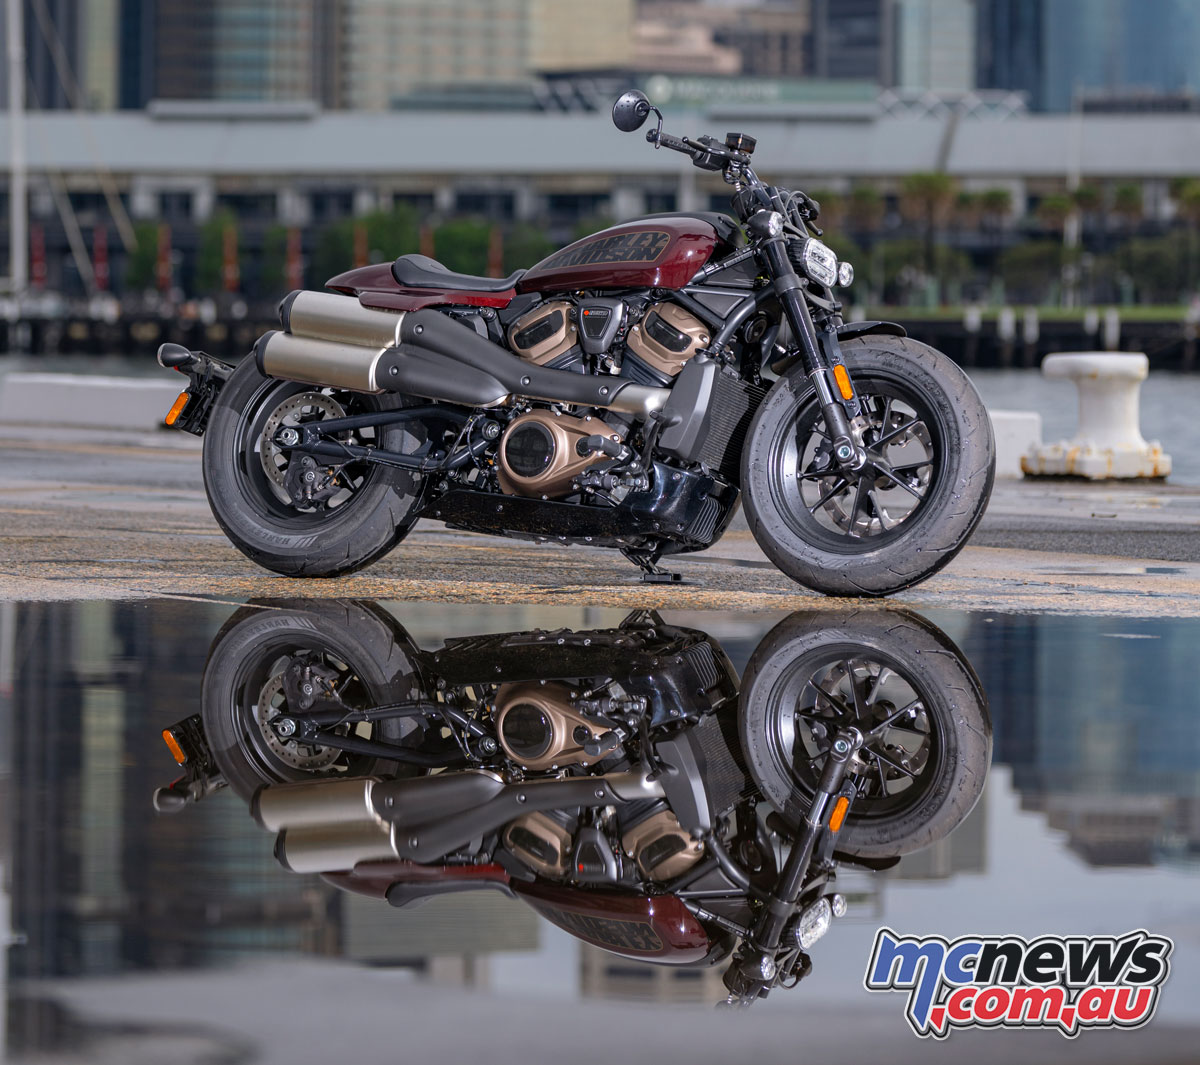 2021 Harley-Davidson Sportster S, First Ride Review